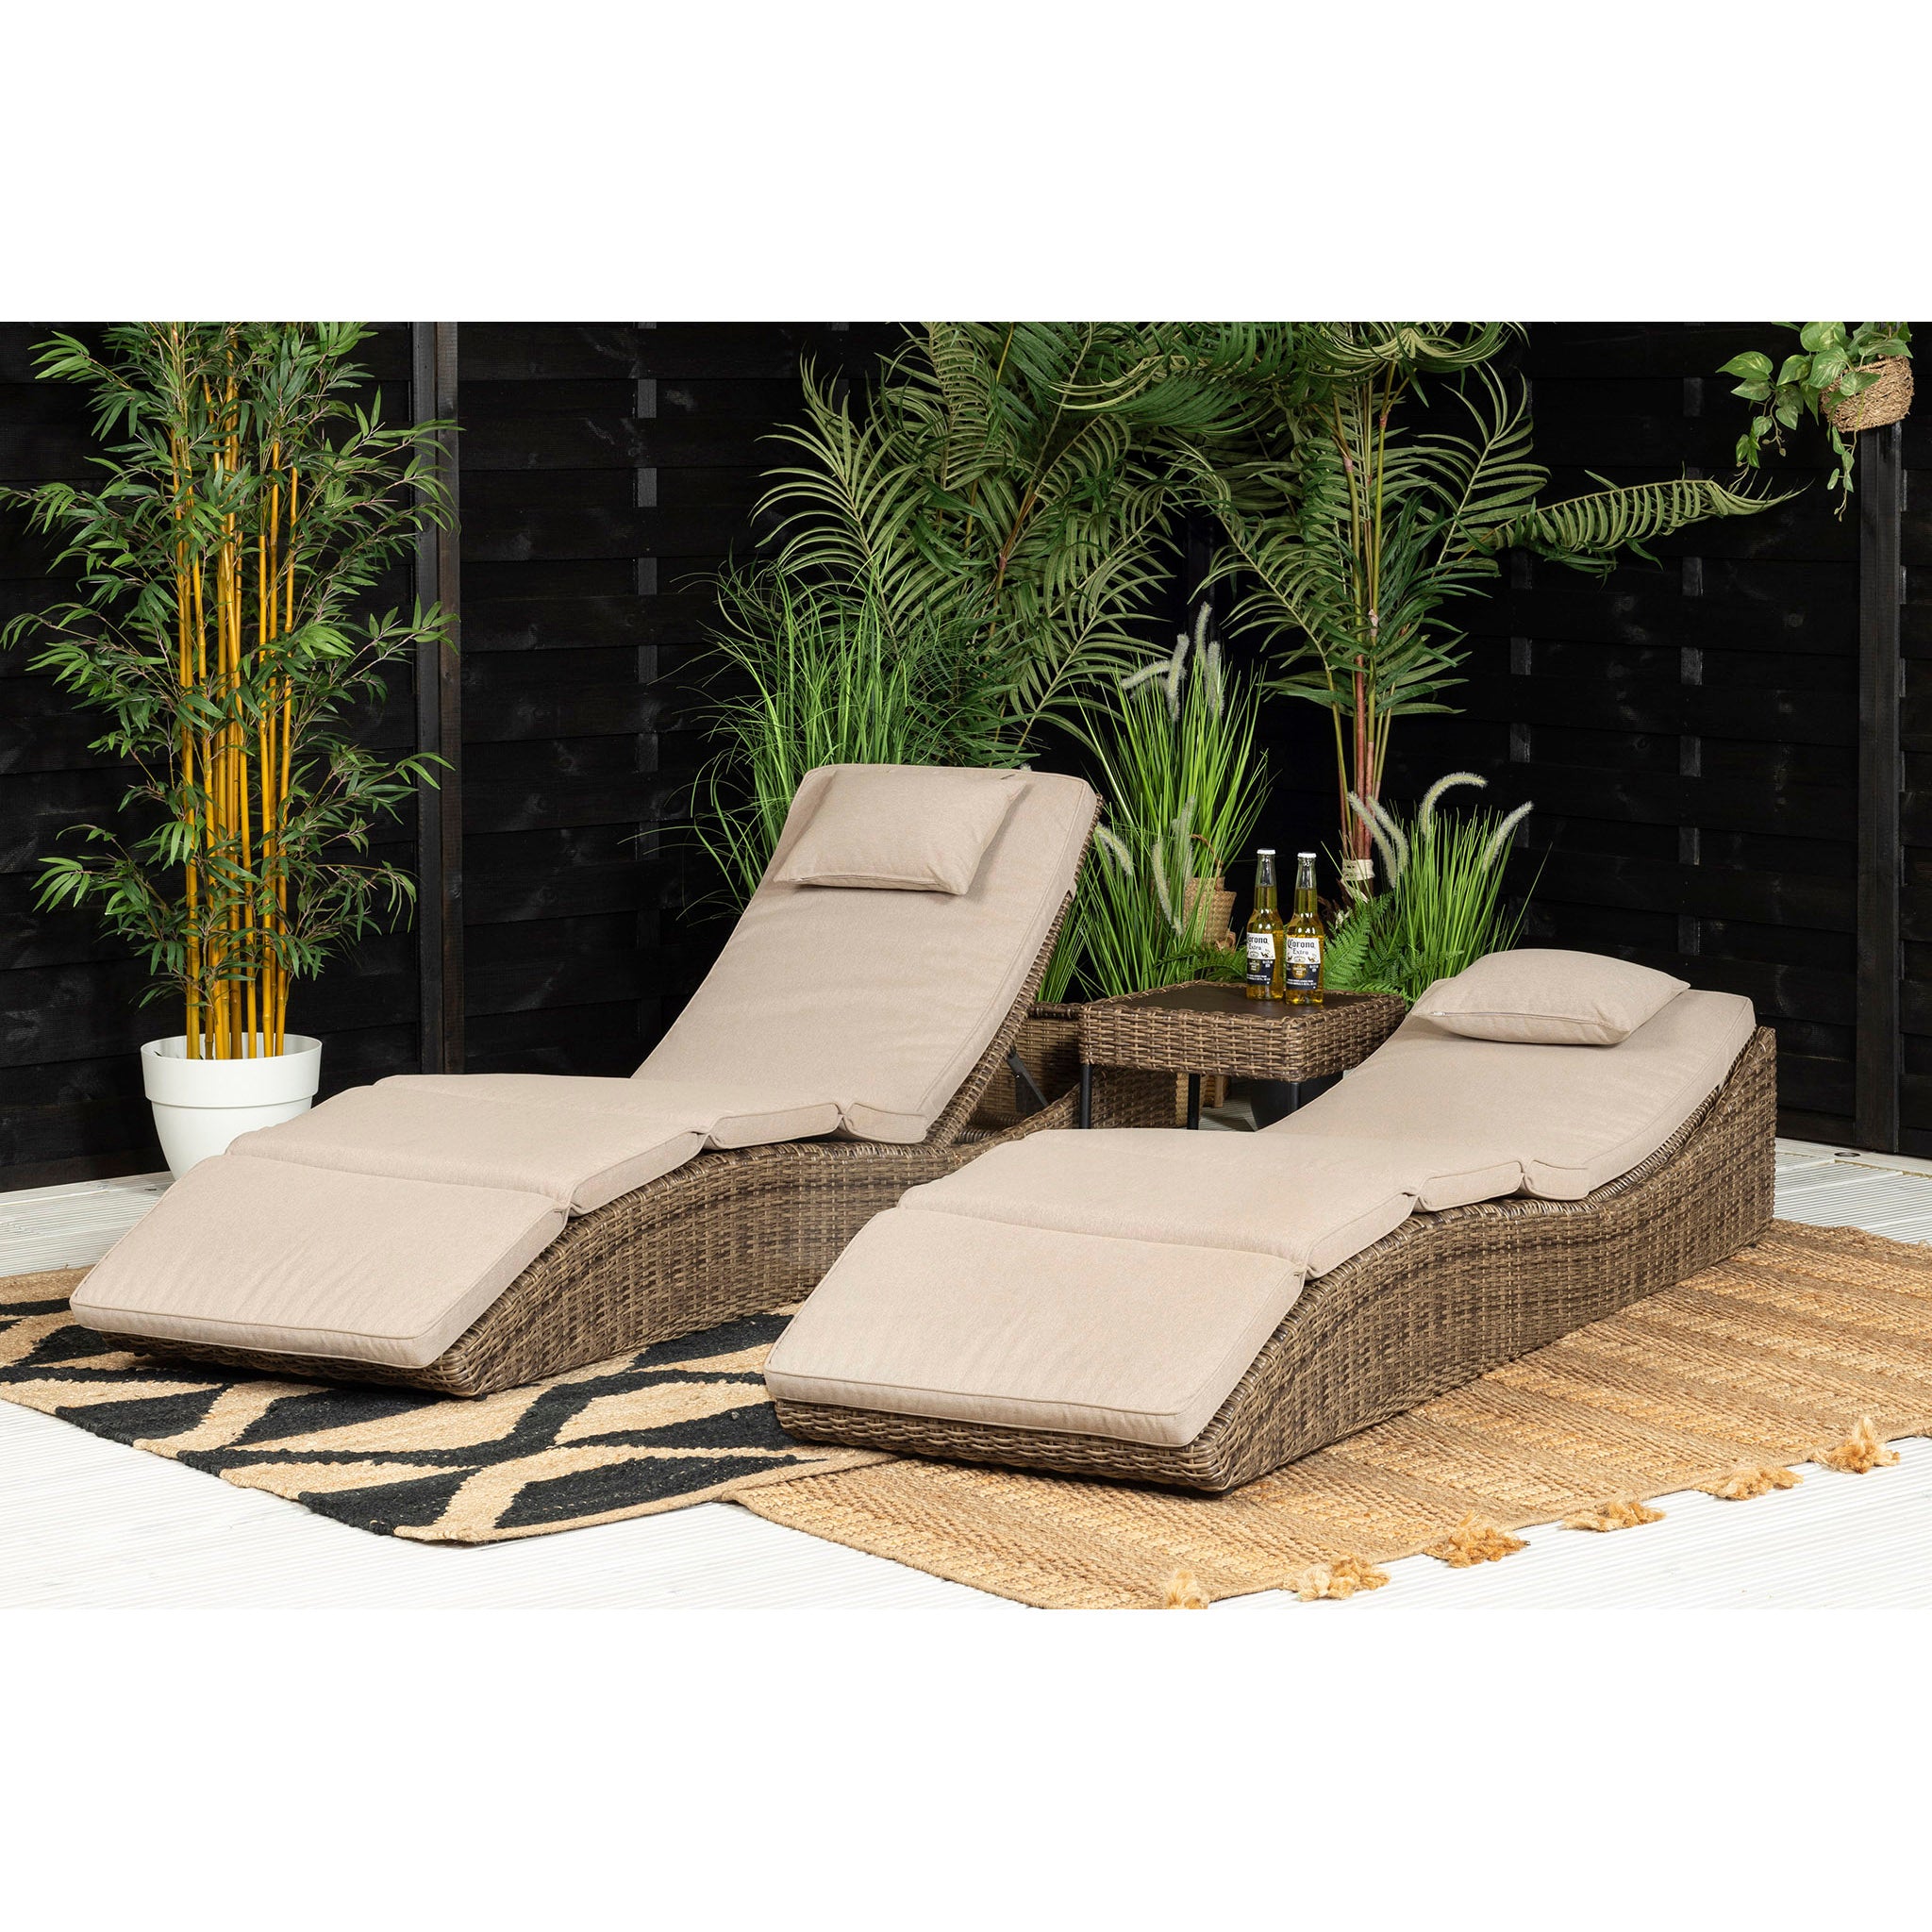 Hazz | Set of 2 Sun Loungers with Side Table in Brown Rattan - Italiancityfurniture